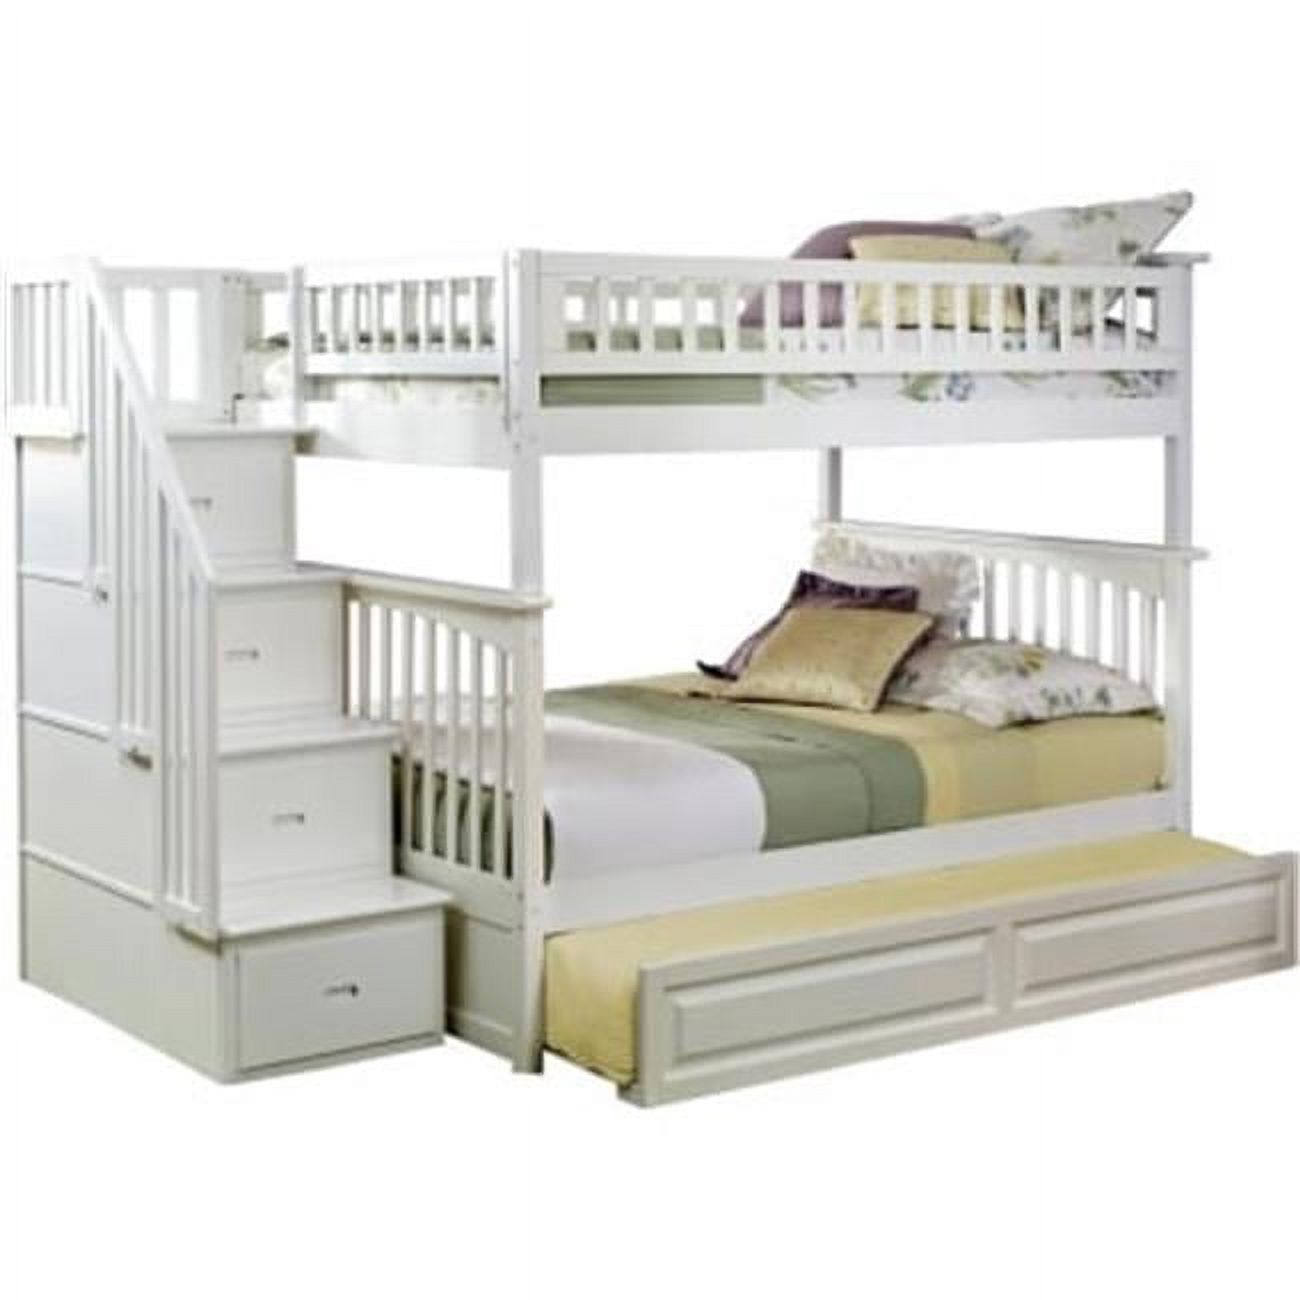 Ab55832 Columbia Staircase Bunkbed With Raised Panel Trundle Bed, Full Over Full Size - White